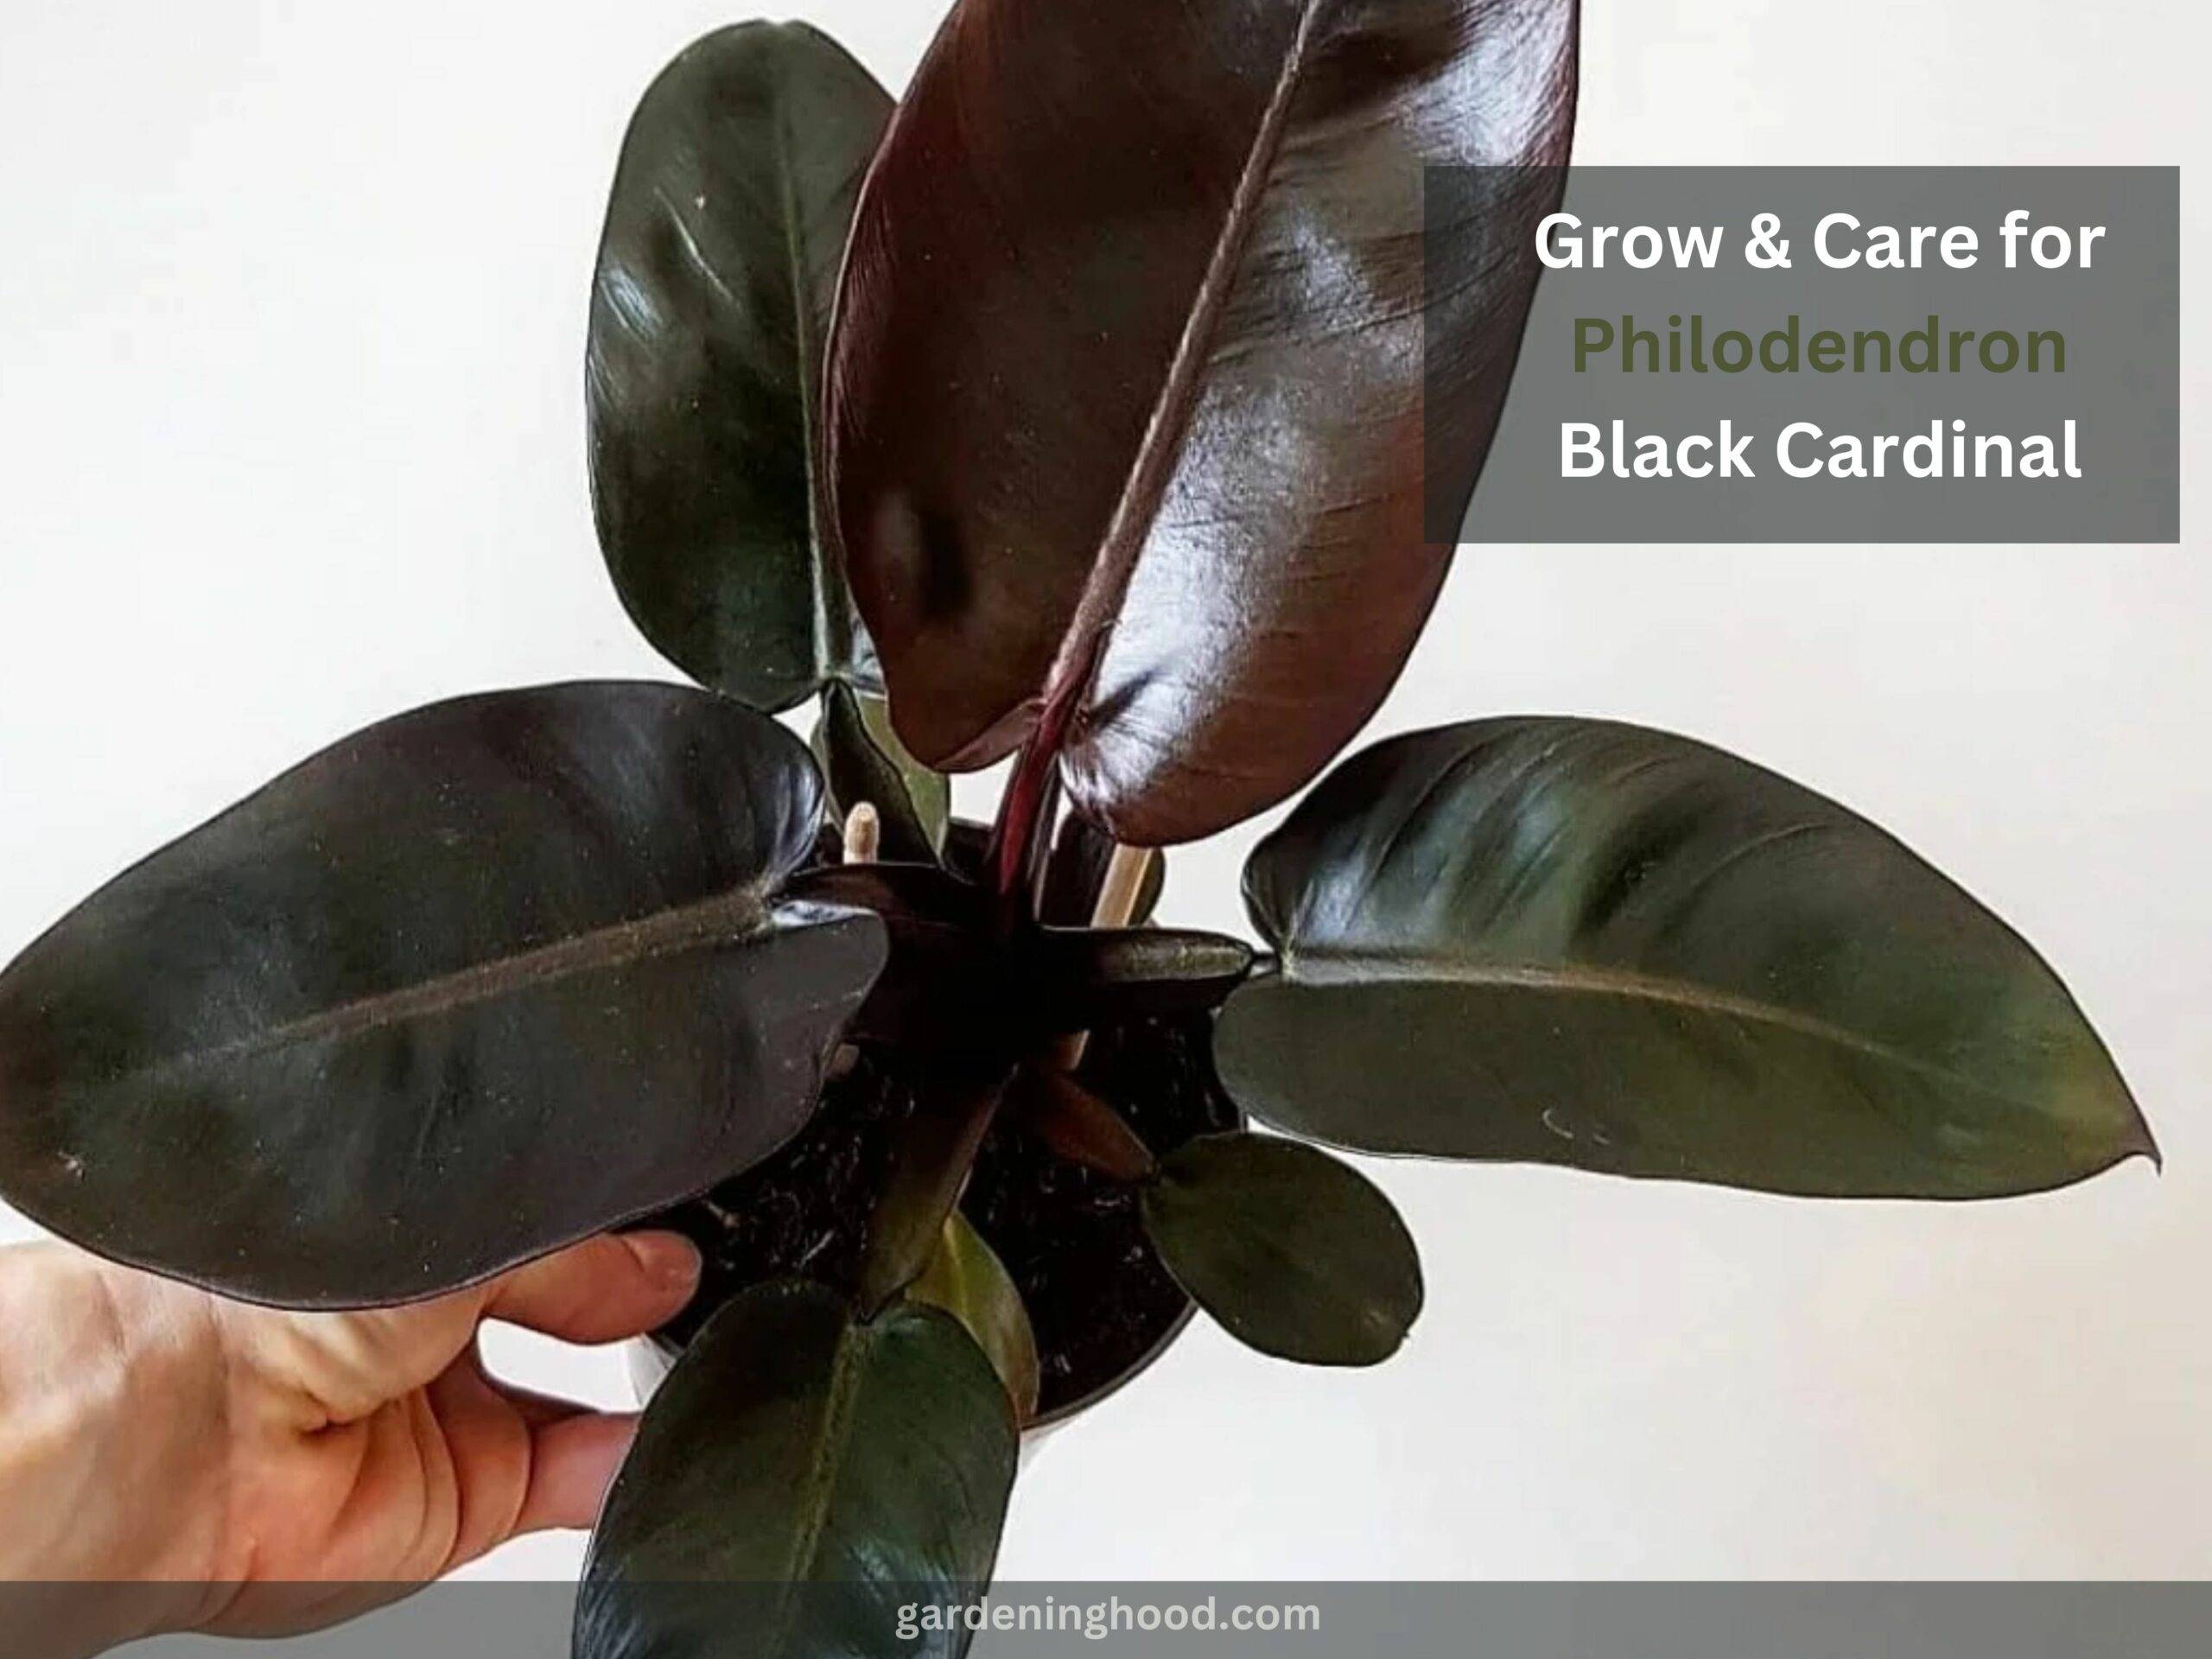 How to Grow & Care for Philodendron Erubescens 'Black Cardinal'